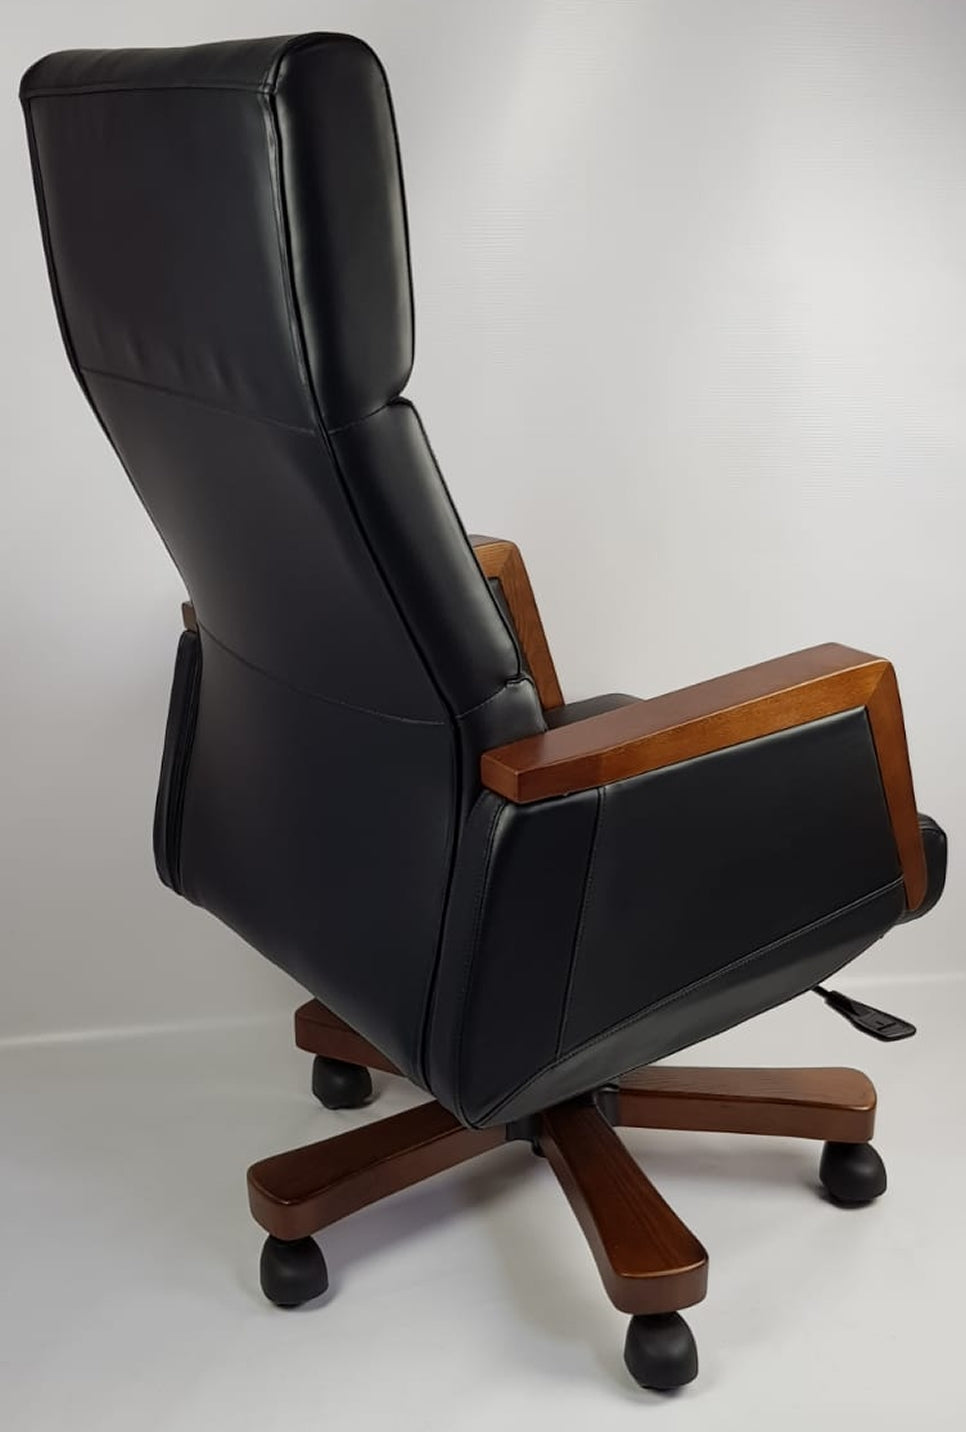 Black Leather Solid Wood Executive Office Chair - HB1819-B